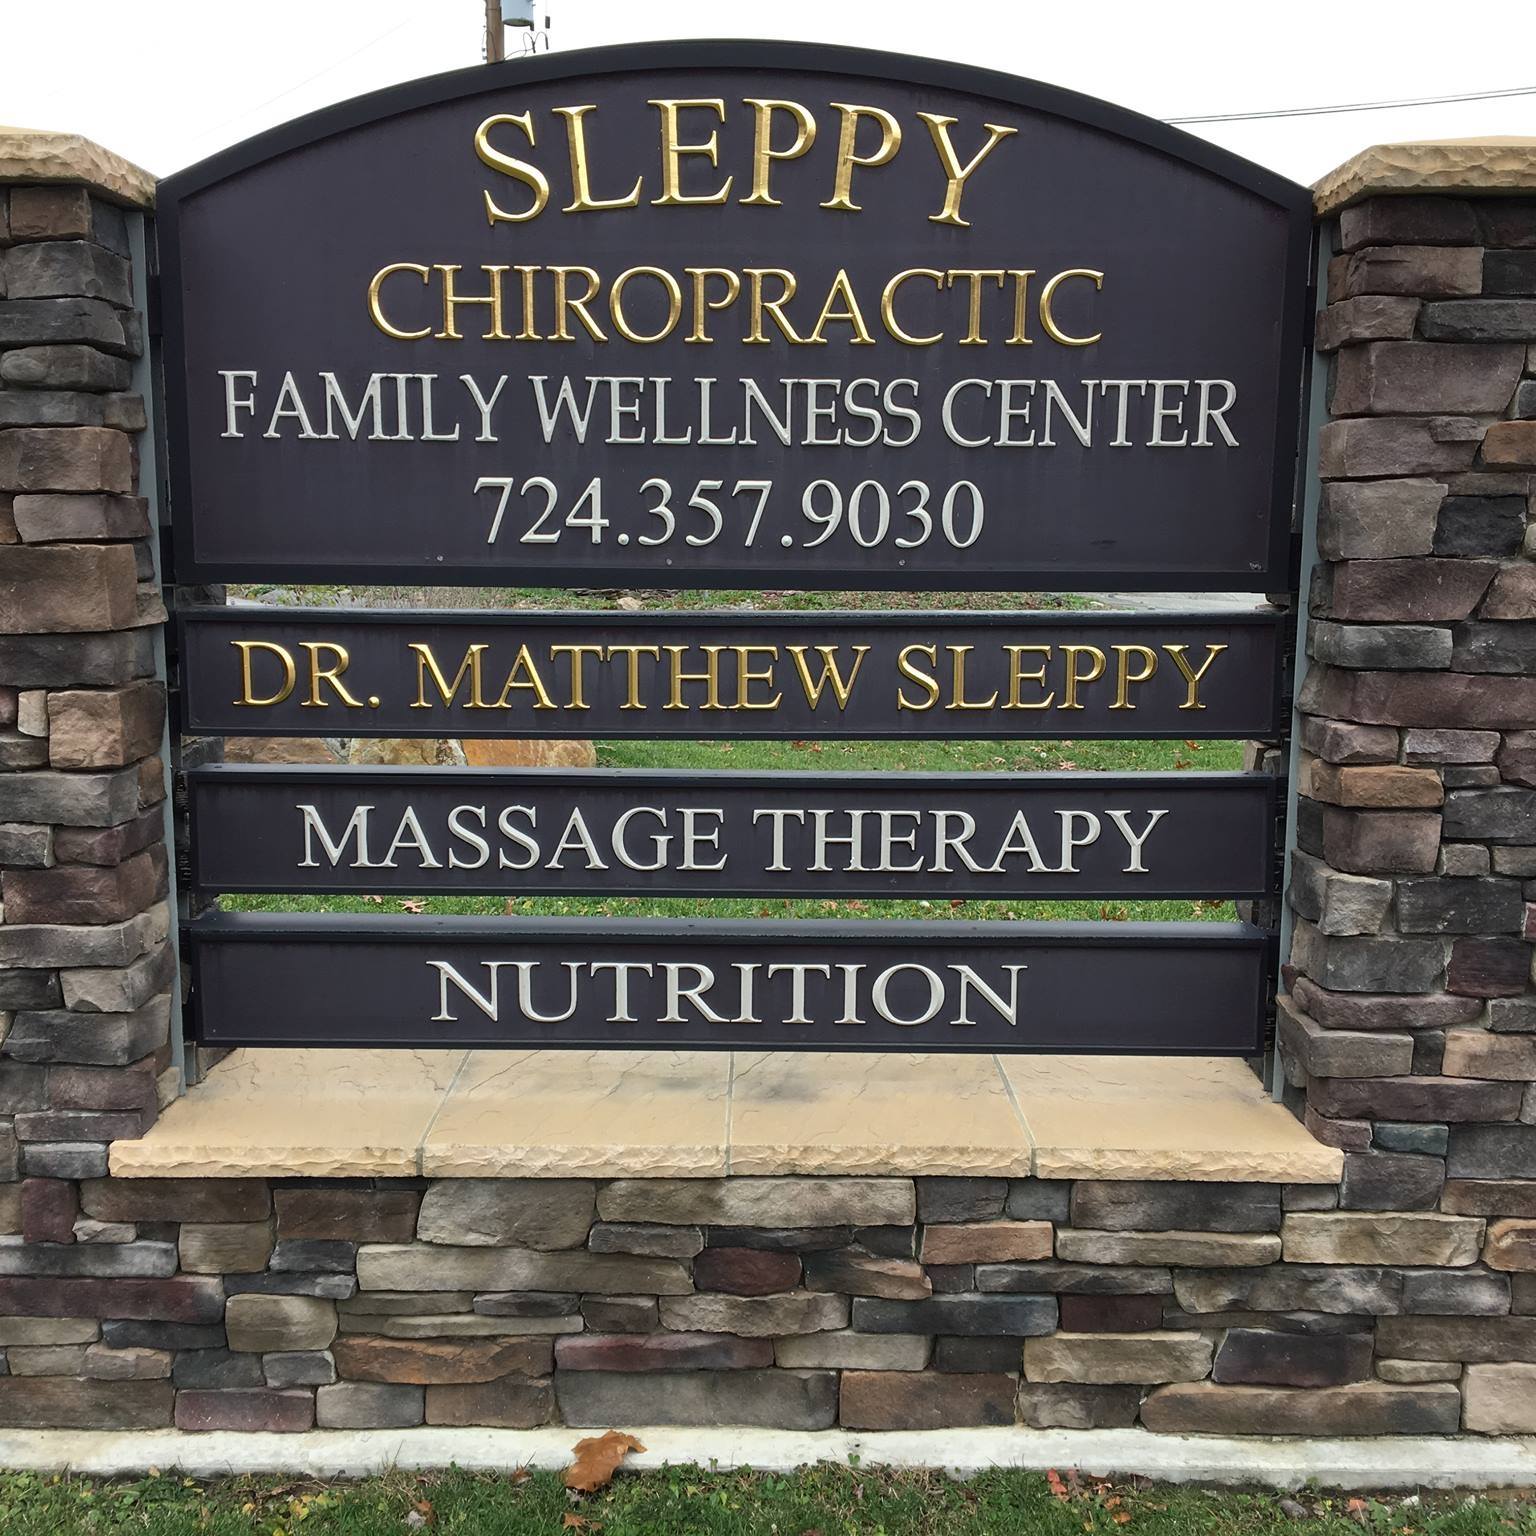 EMS Muscle Therapy in California - Almaden Family Chiropractic